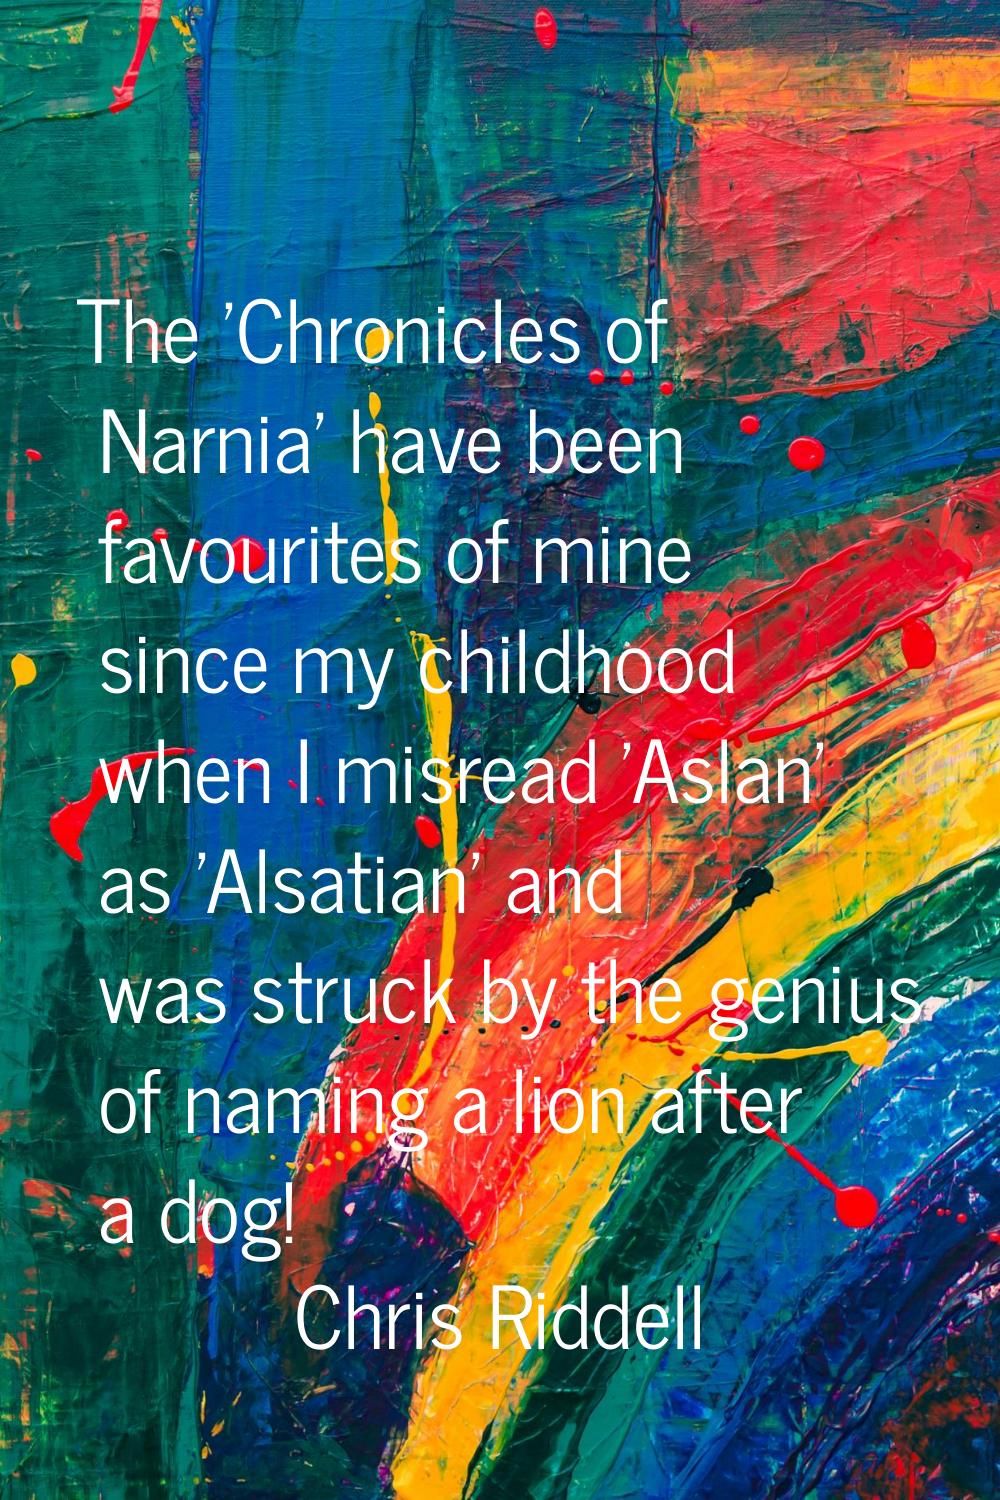 The 'Chronicles of Narnia' have been favourites of mine since my childhood when I misread 'Aslan' a